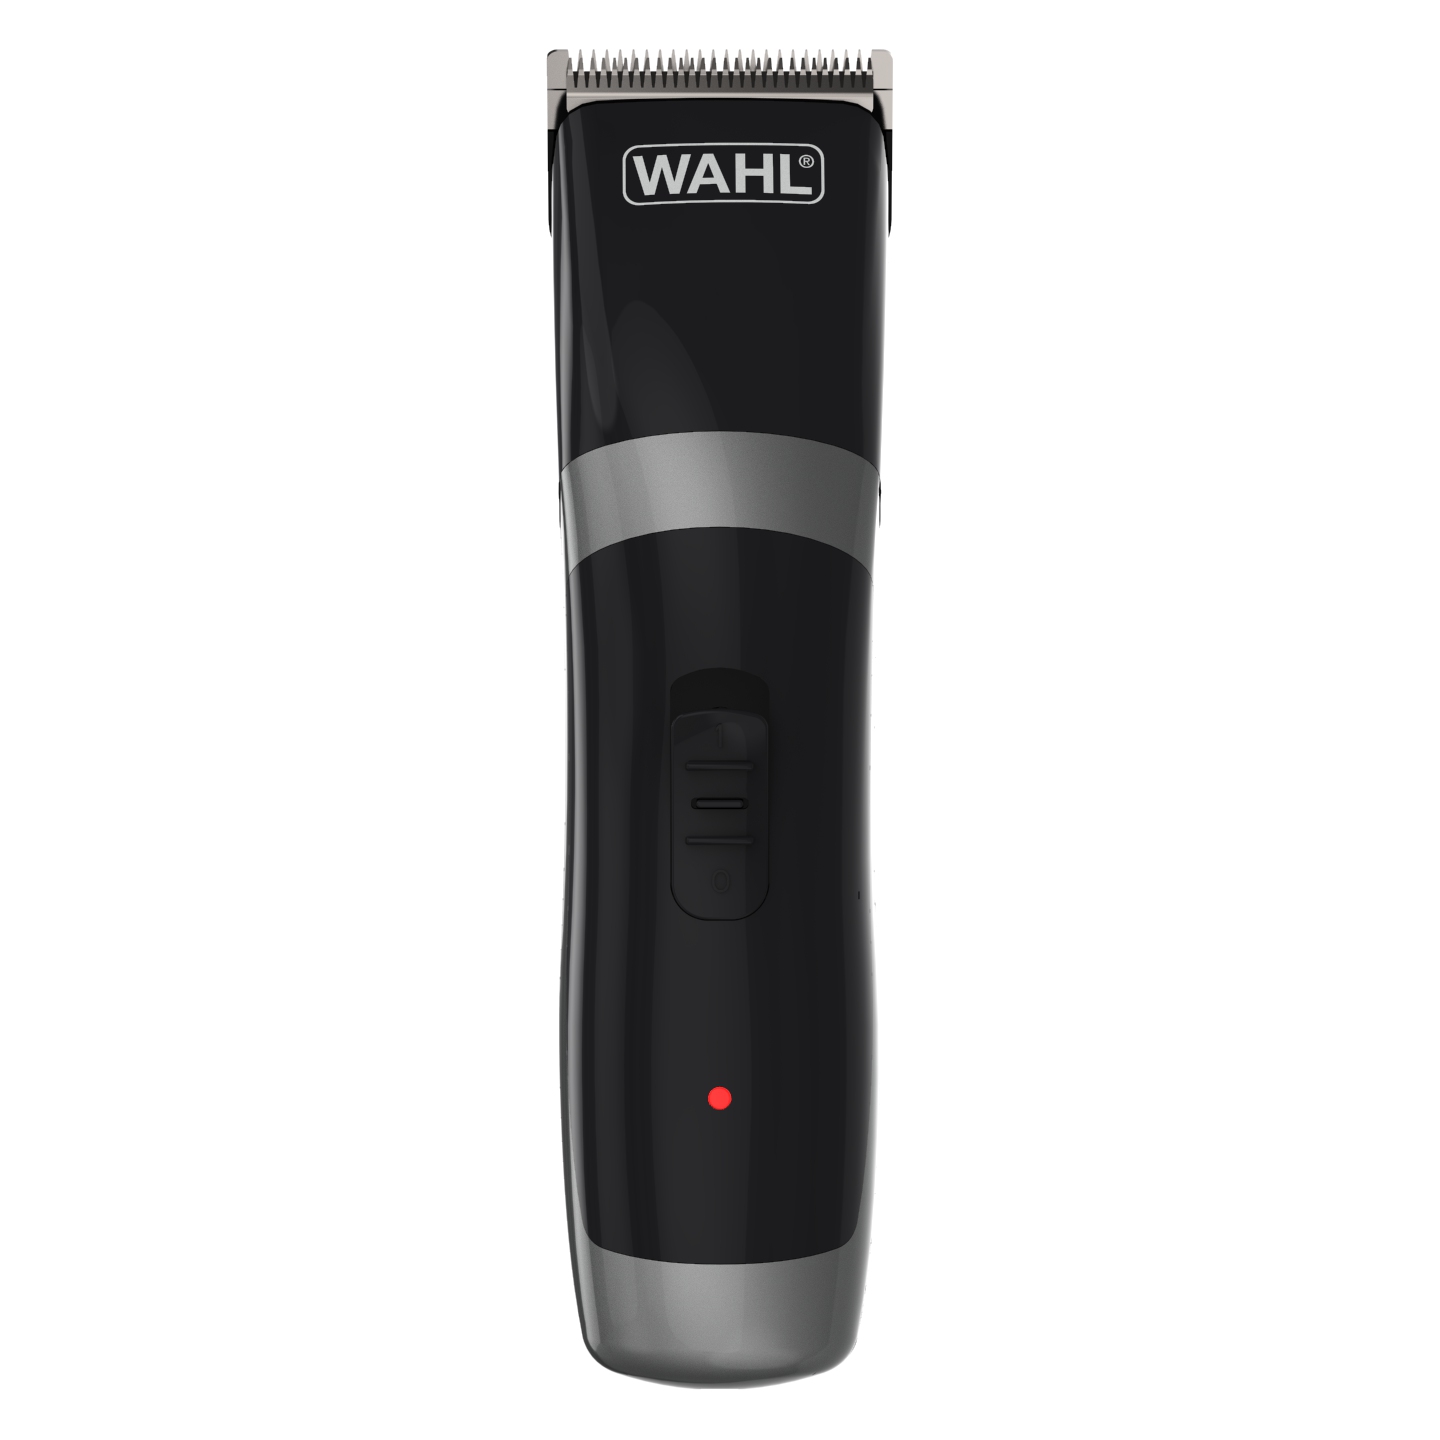 wireless barber clippers